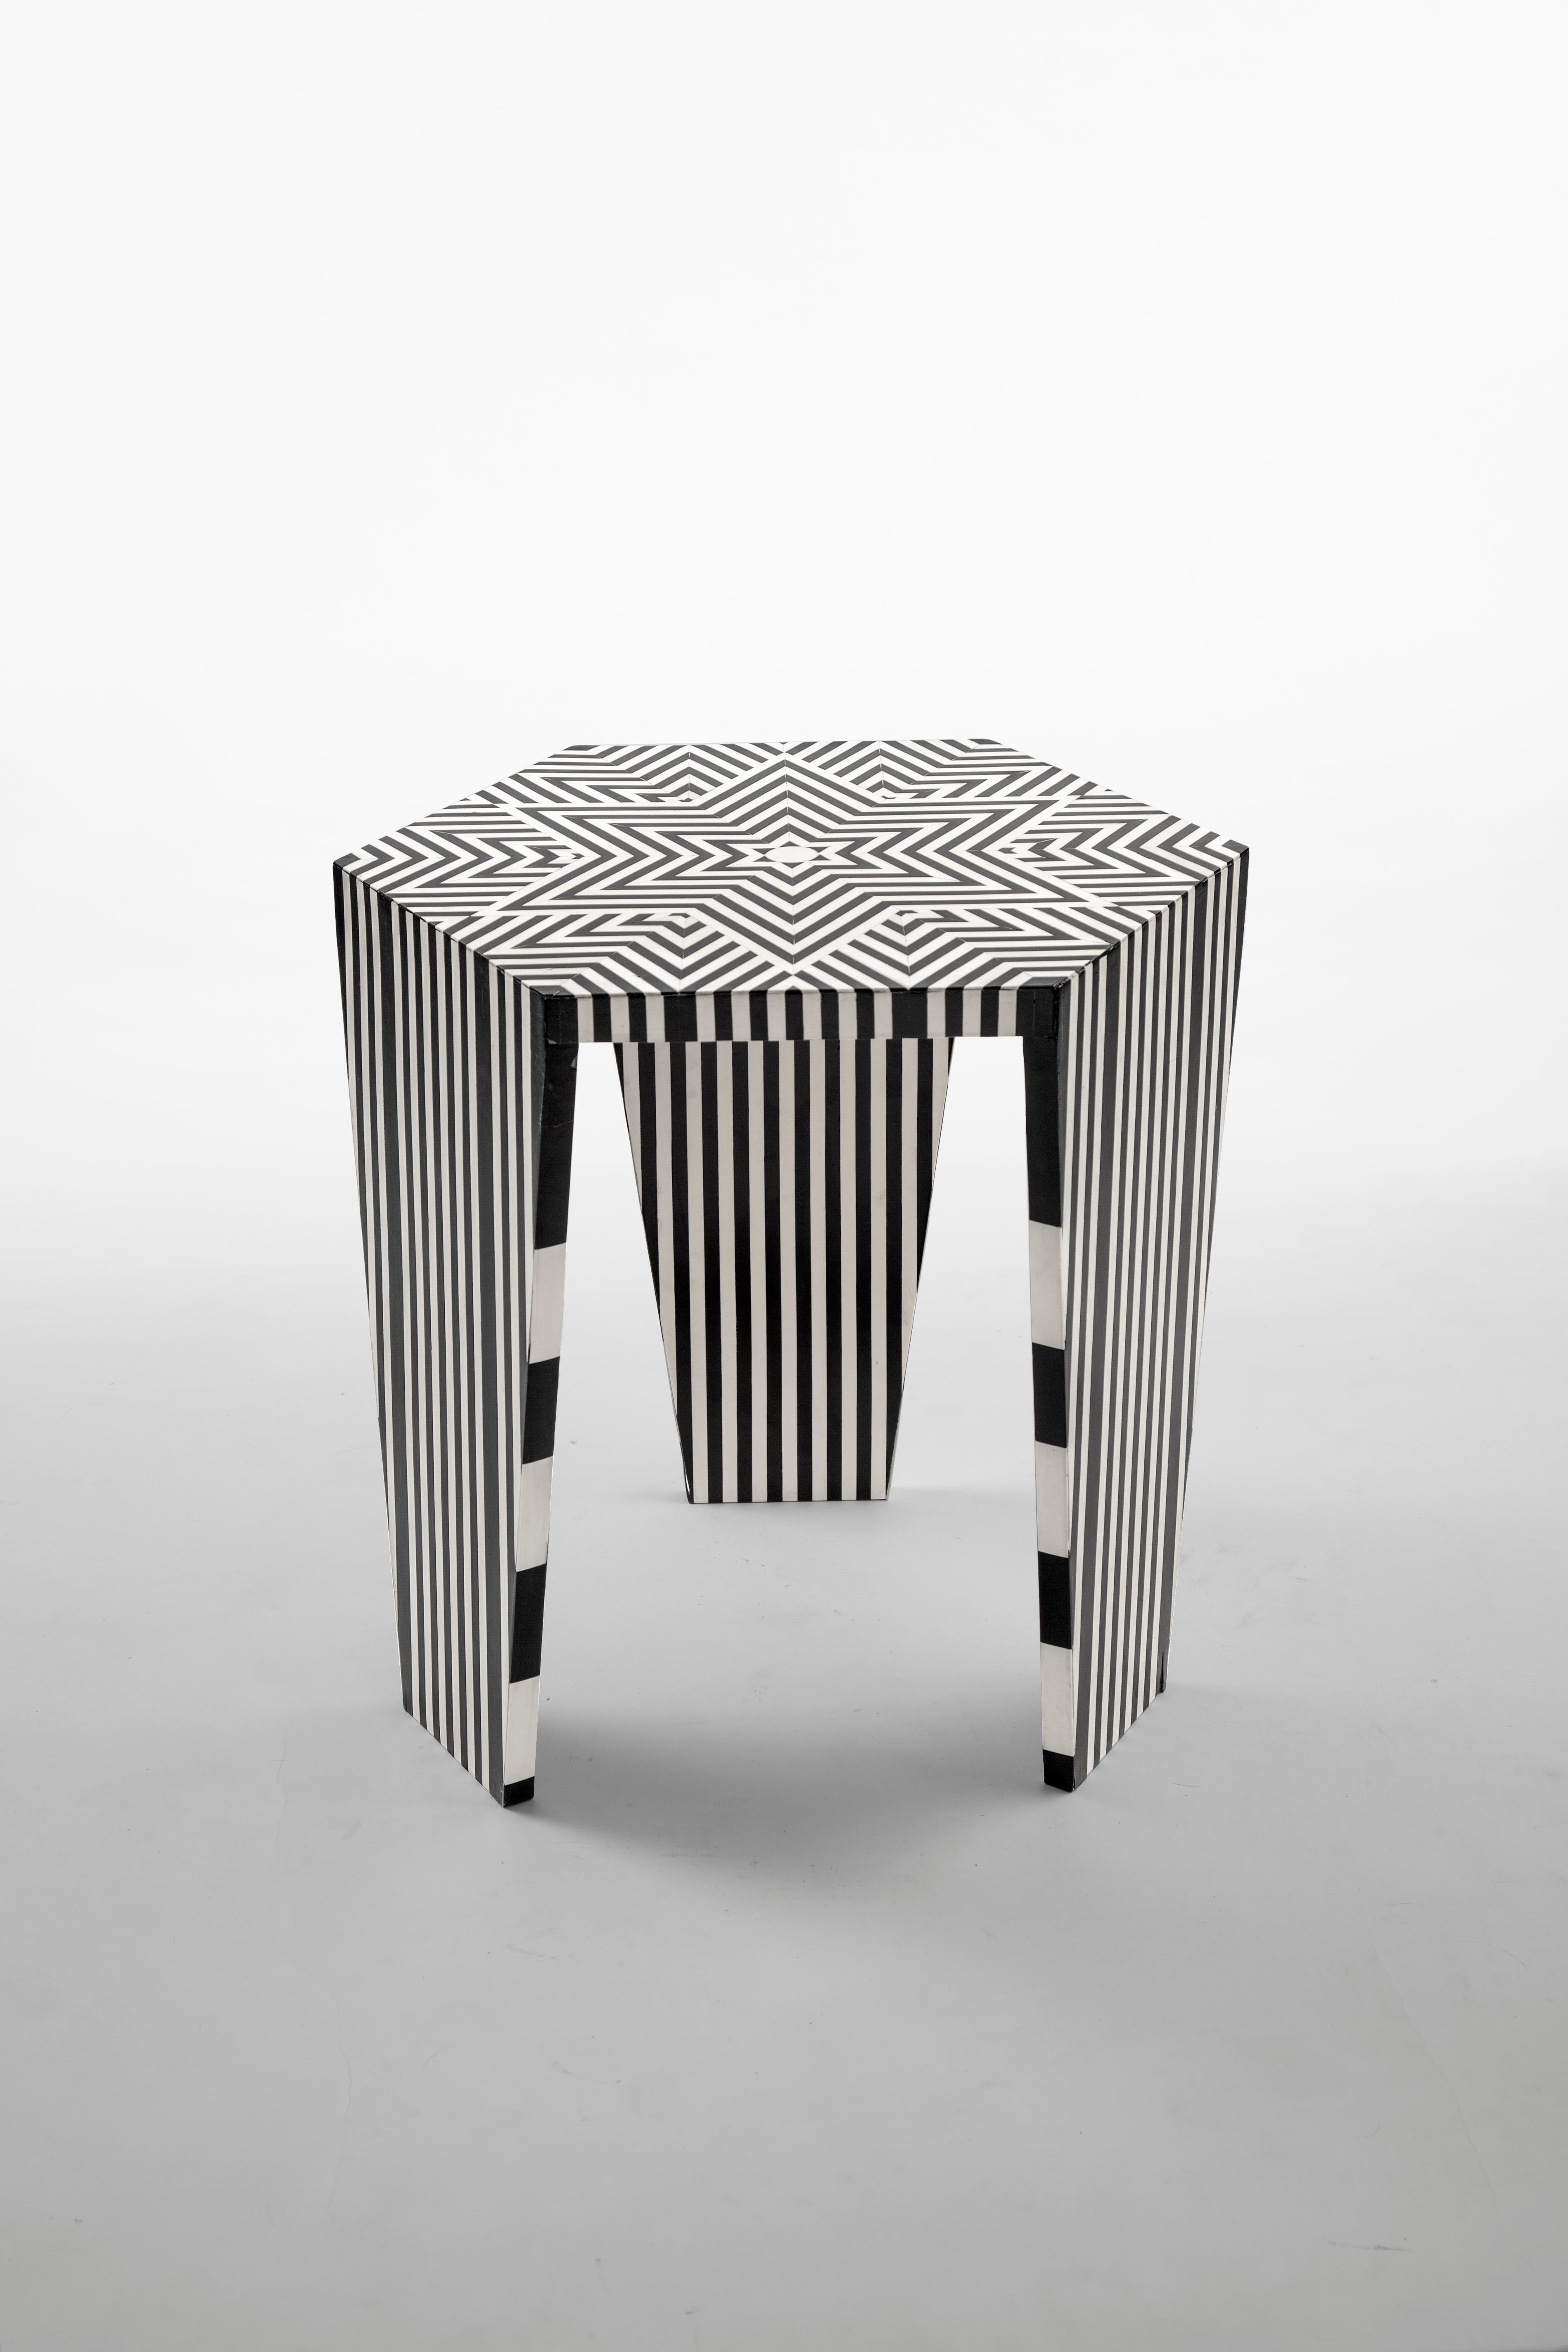 Modern Hand-Crafted Side Table with Black & White Star Pattern Made of Acrylic - Small